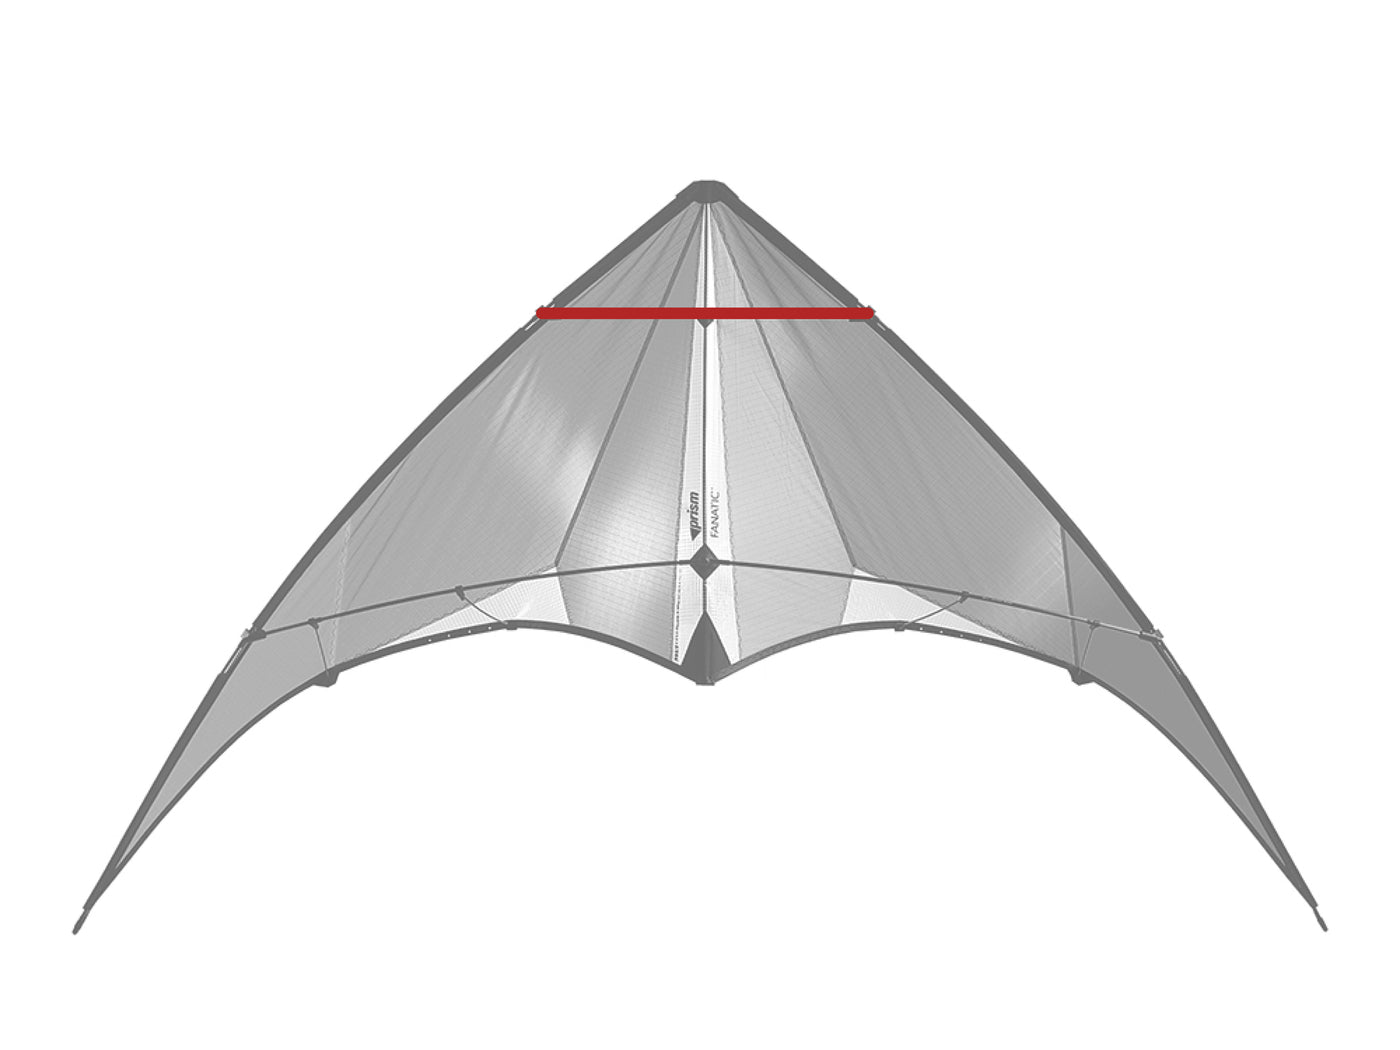 Diagram showing location of the Fanatic (1997) Upper Spreader on the kite.